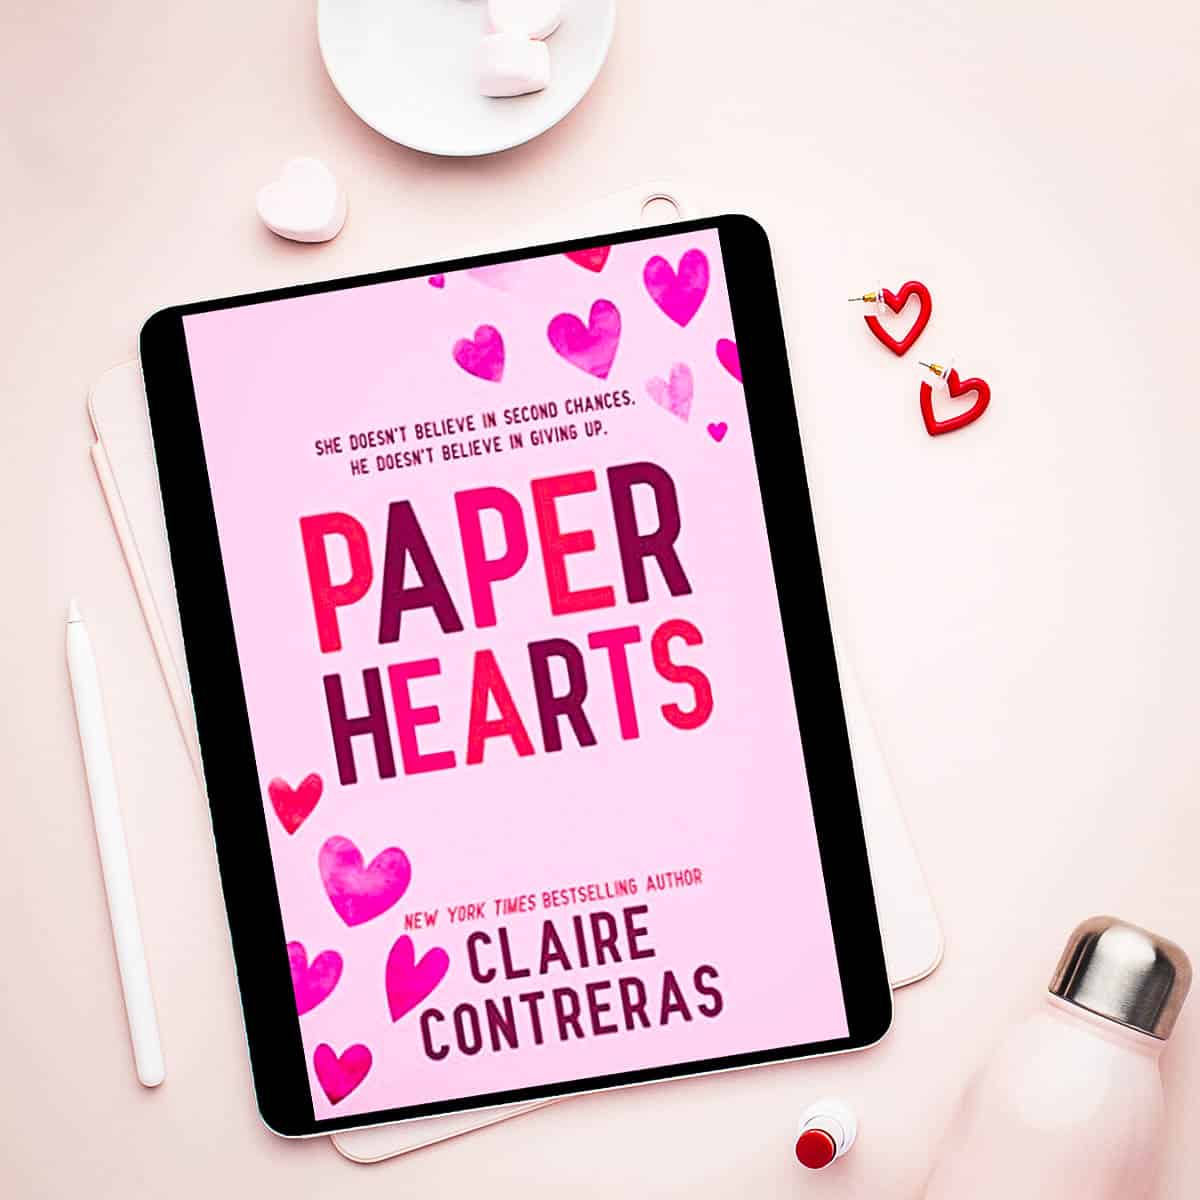 Read Chapter 1 of Paper Hearts by Claire Contreras! 2